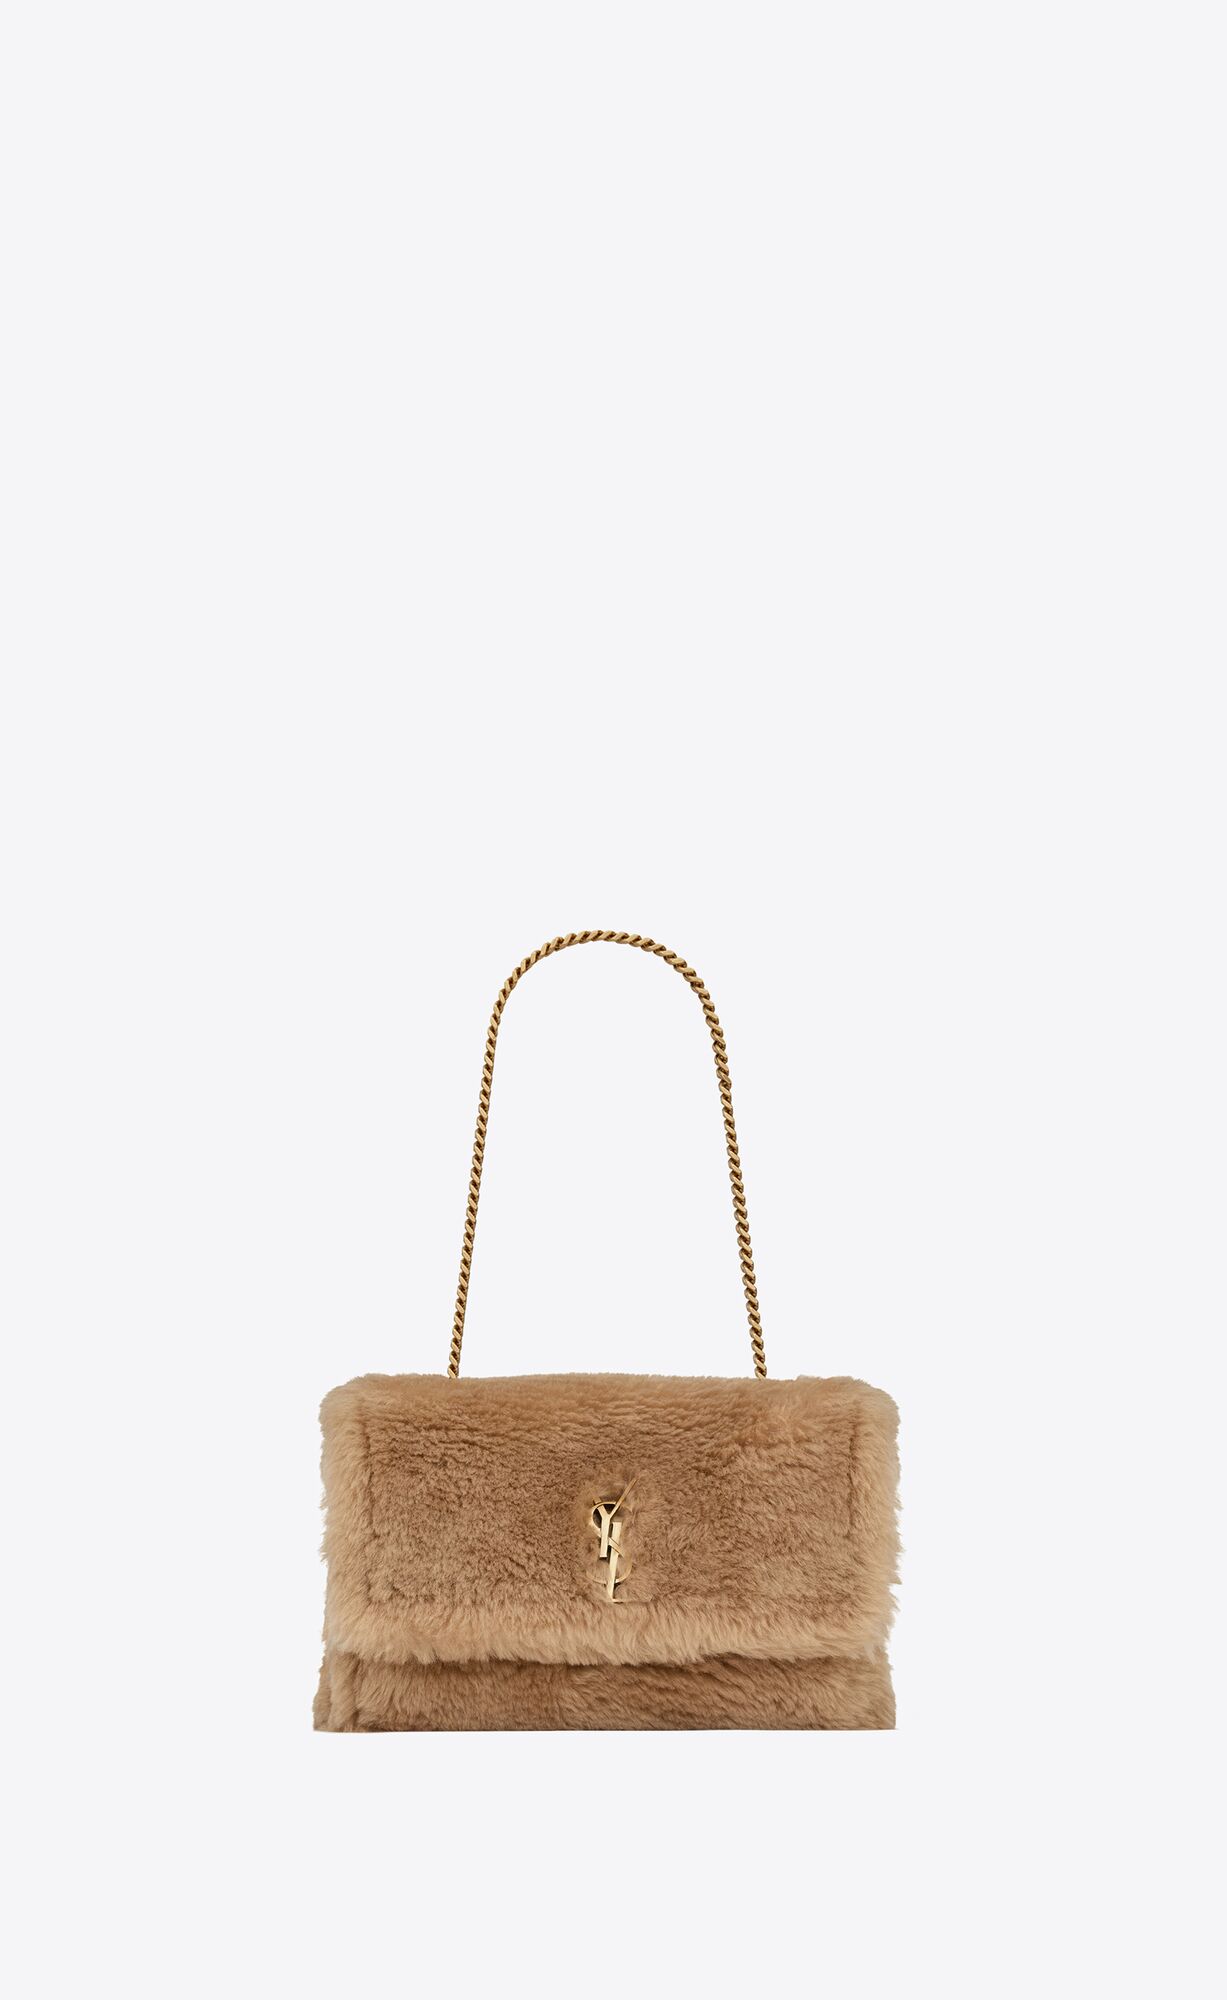 SMALL REVERSIBLE KATE in shearling and leather | Saint Laurent | YSL.com